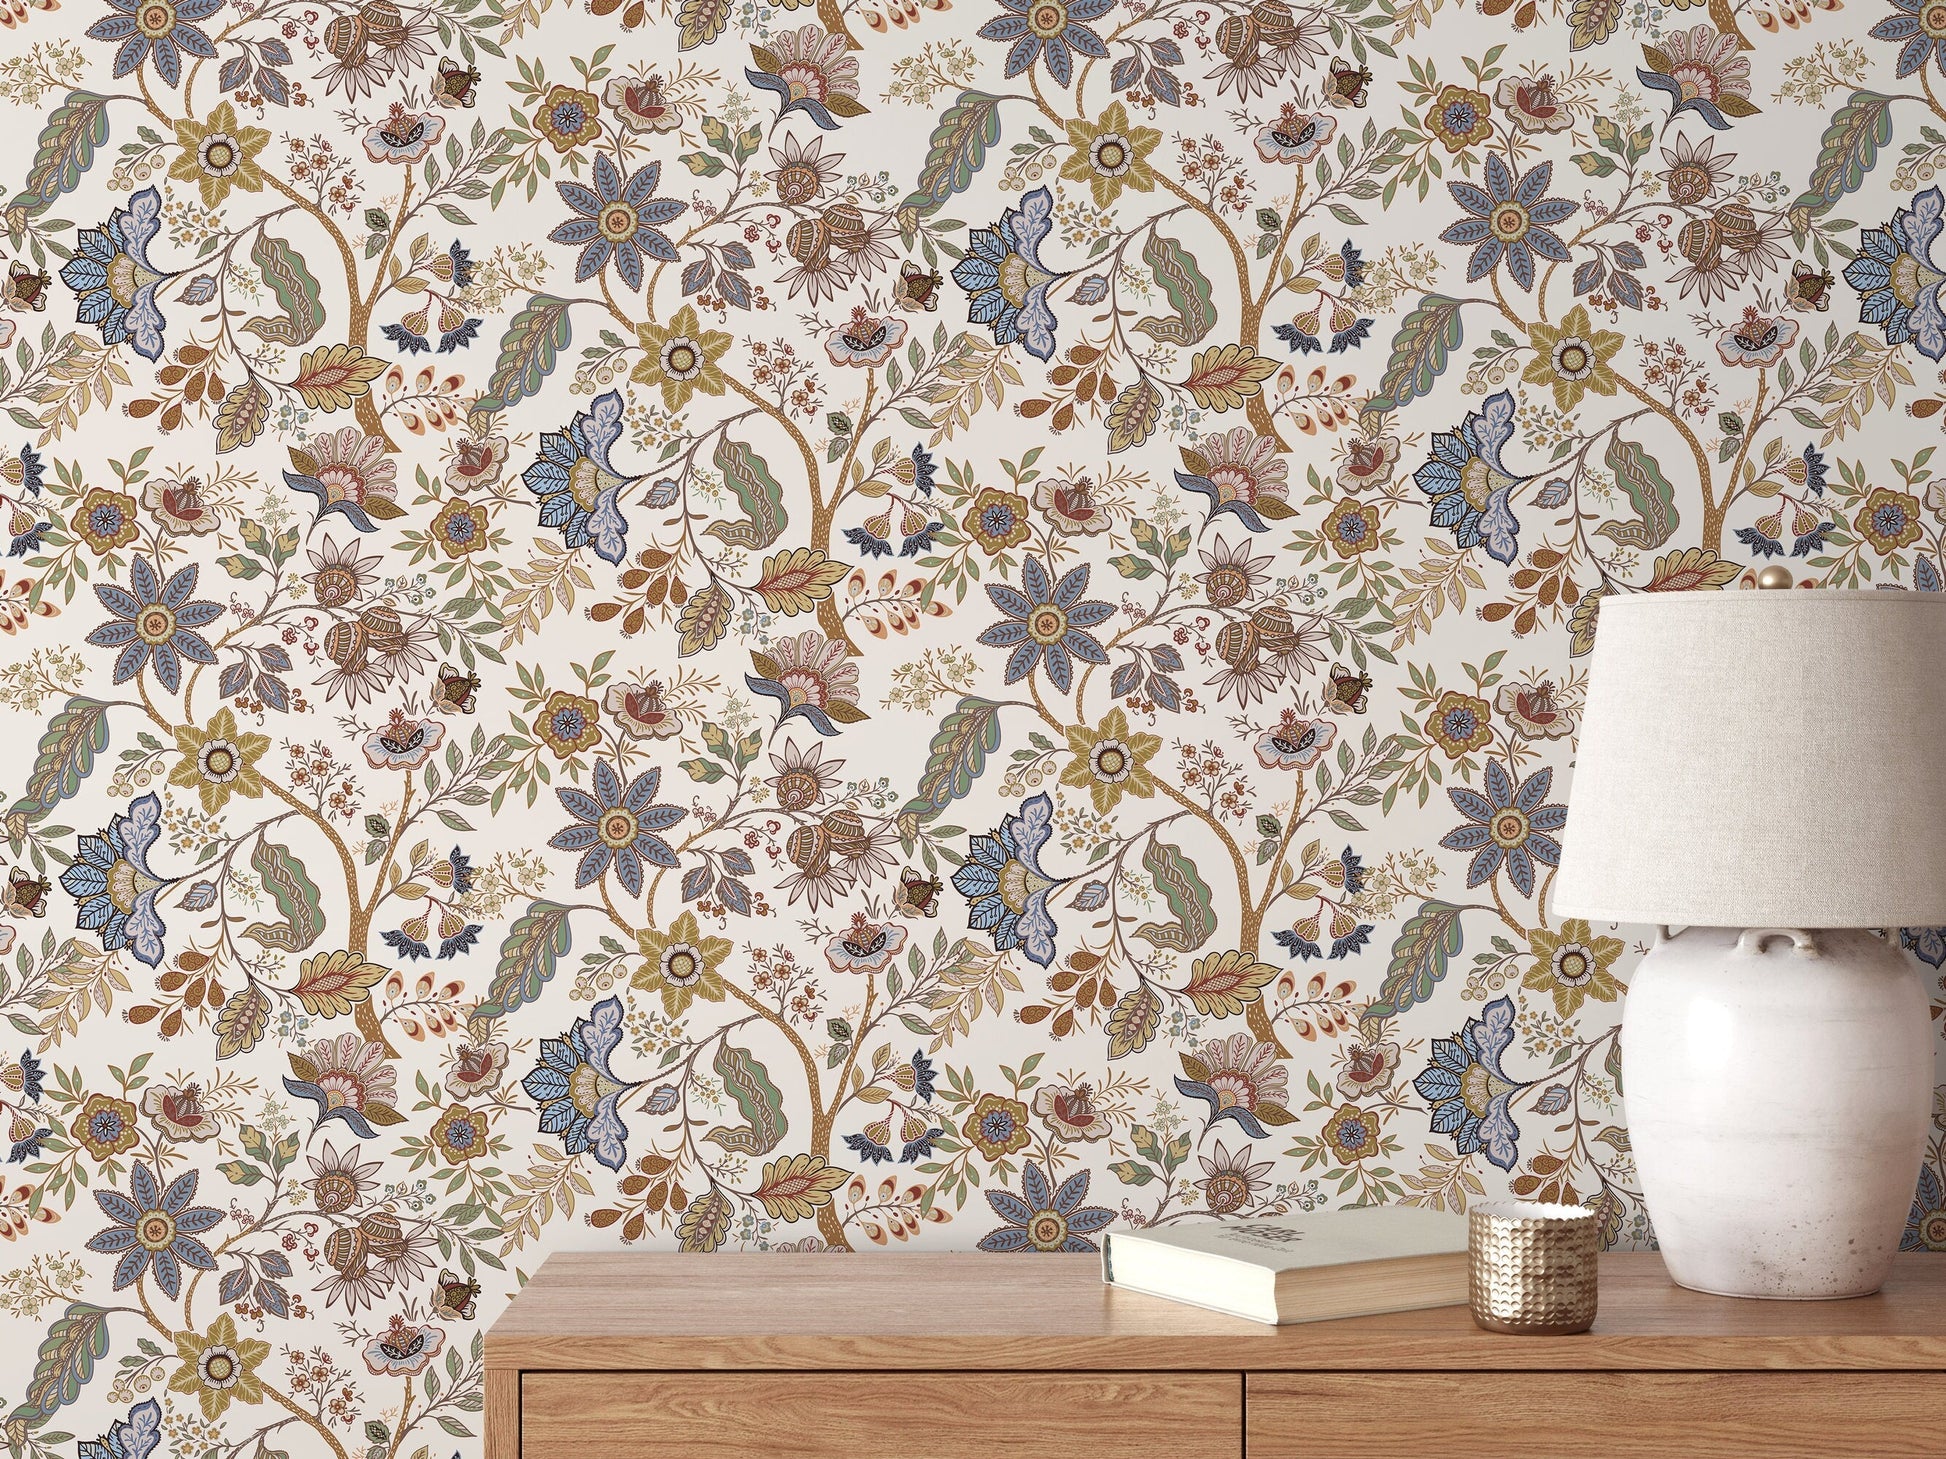 Taupe Chintz Floral Wallpaper / Peel and Stick Wallpaper Removable Wallpaper Home Decor Wall Art Wall Decor Room Decor - D385